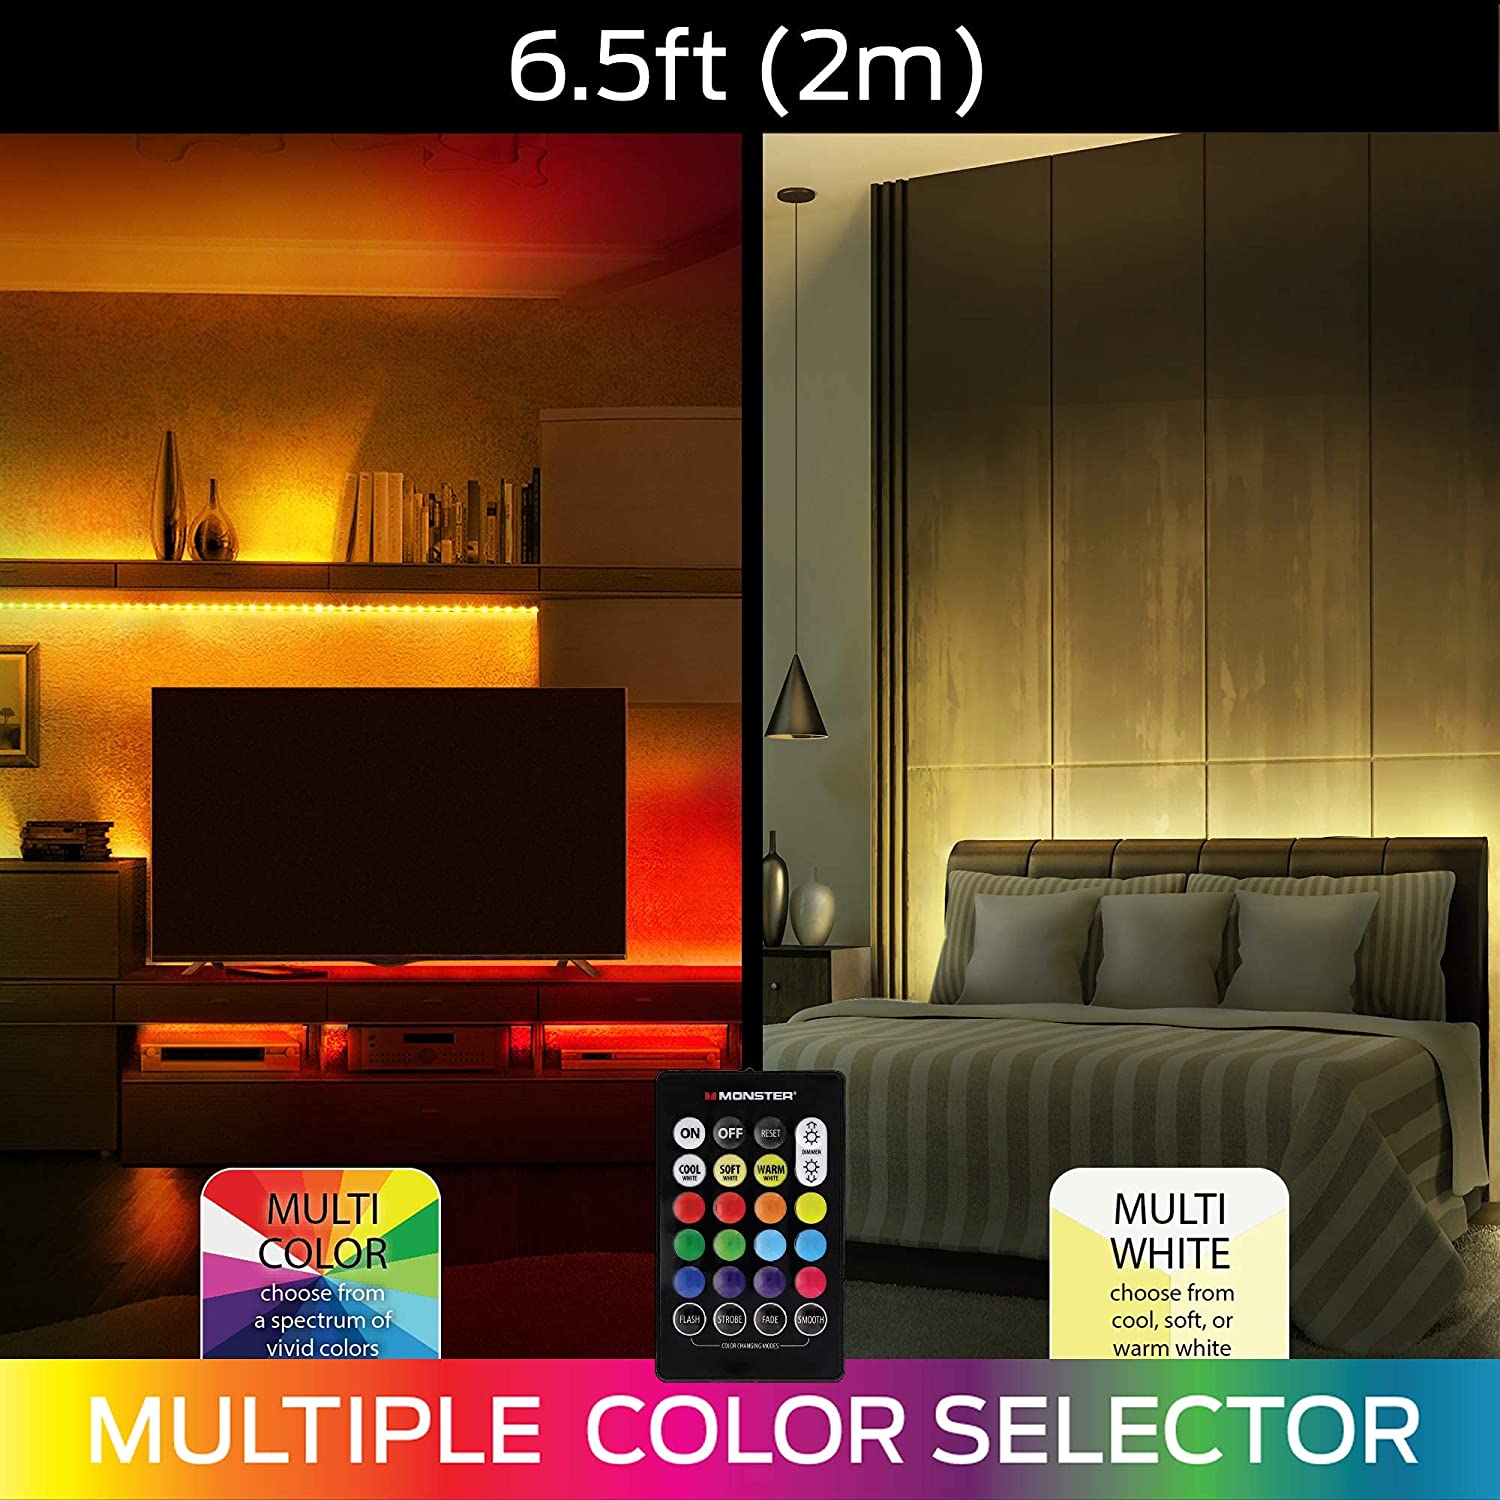 MONSTER Multi Color / Multi White 6.5ft. LED Light Strip with remote